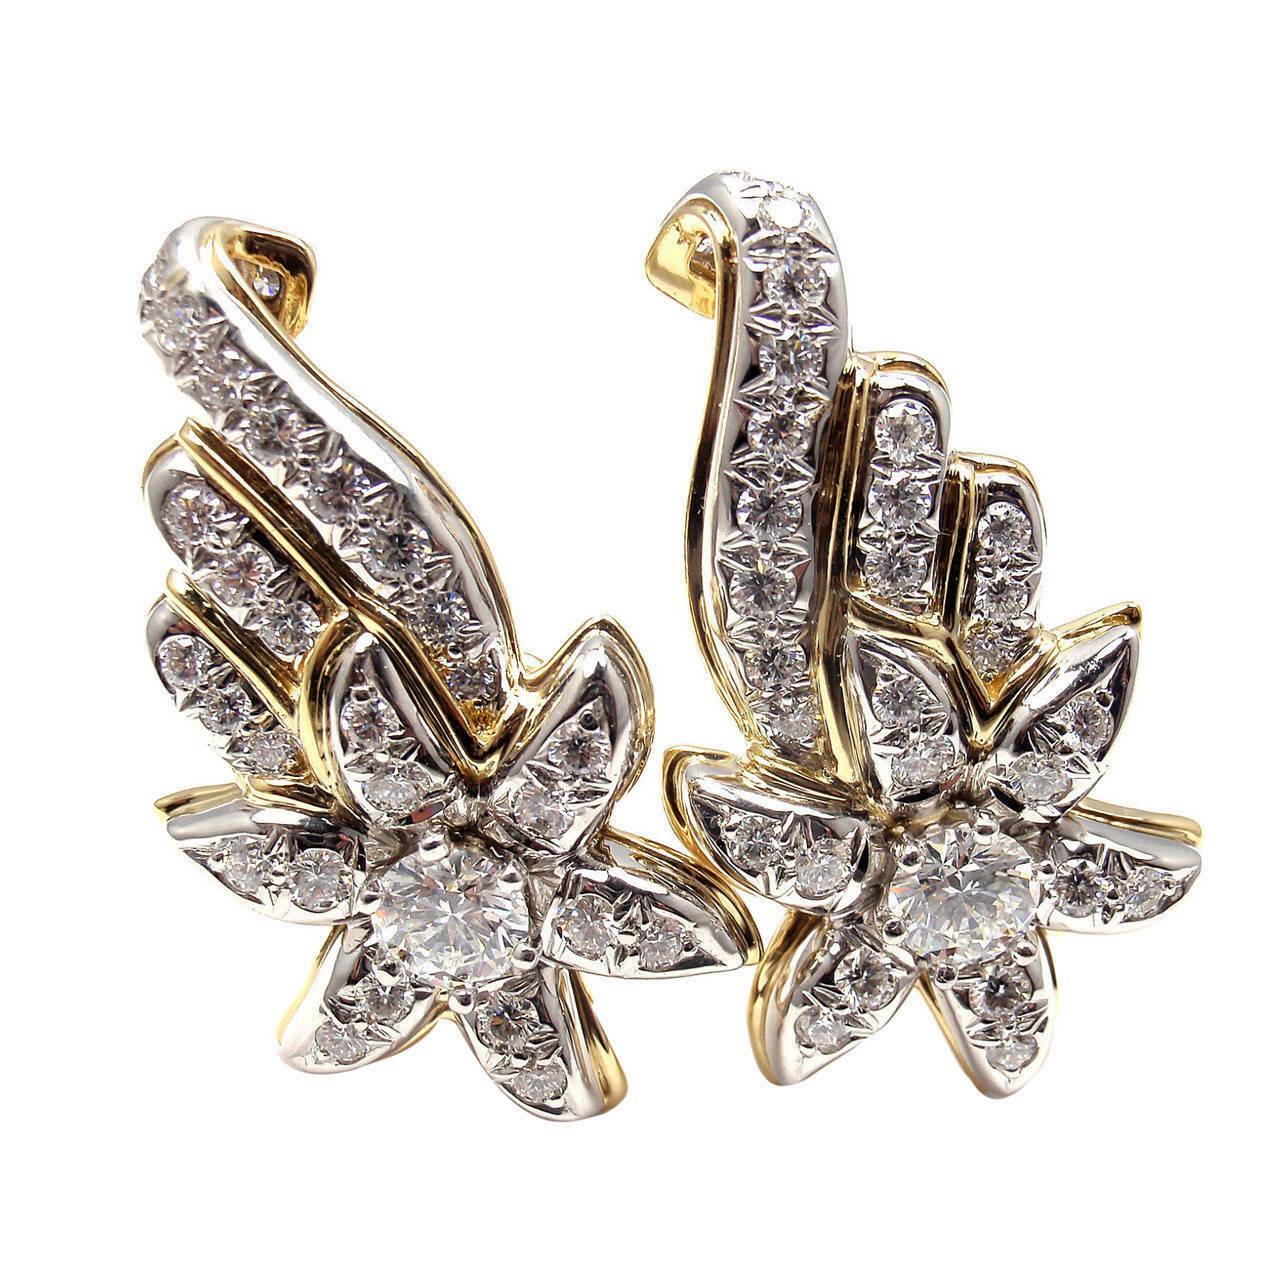 Platinum & 18k Yellow Gold Flame Earrings by Jean Schlumberger
for Tiffany & Co. 
With 62 round brilliant cut diamonds  VS1 clarity, E color total weight 
approximately 3.60ct
Details: 
Weight: 21.8 grams
Dimensions: 35mm x 20mm
Stamped Hallmarks: